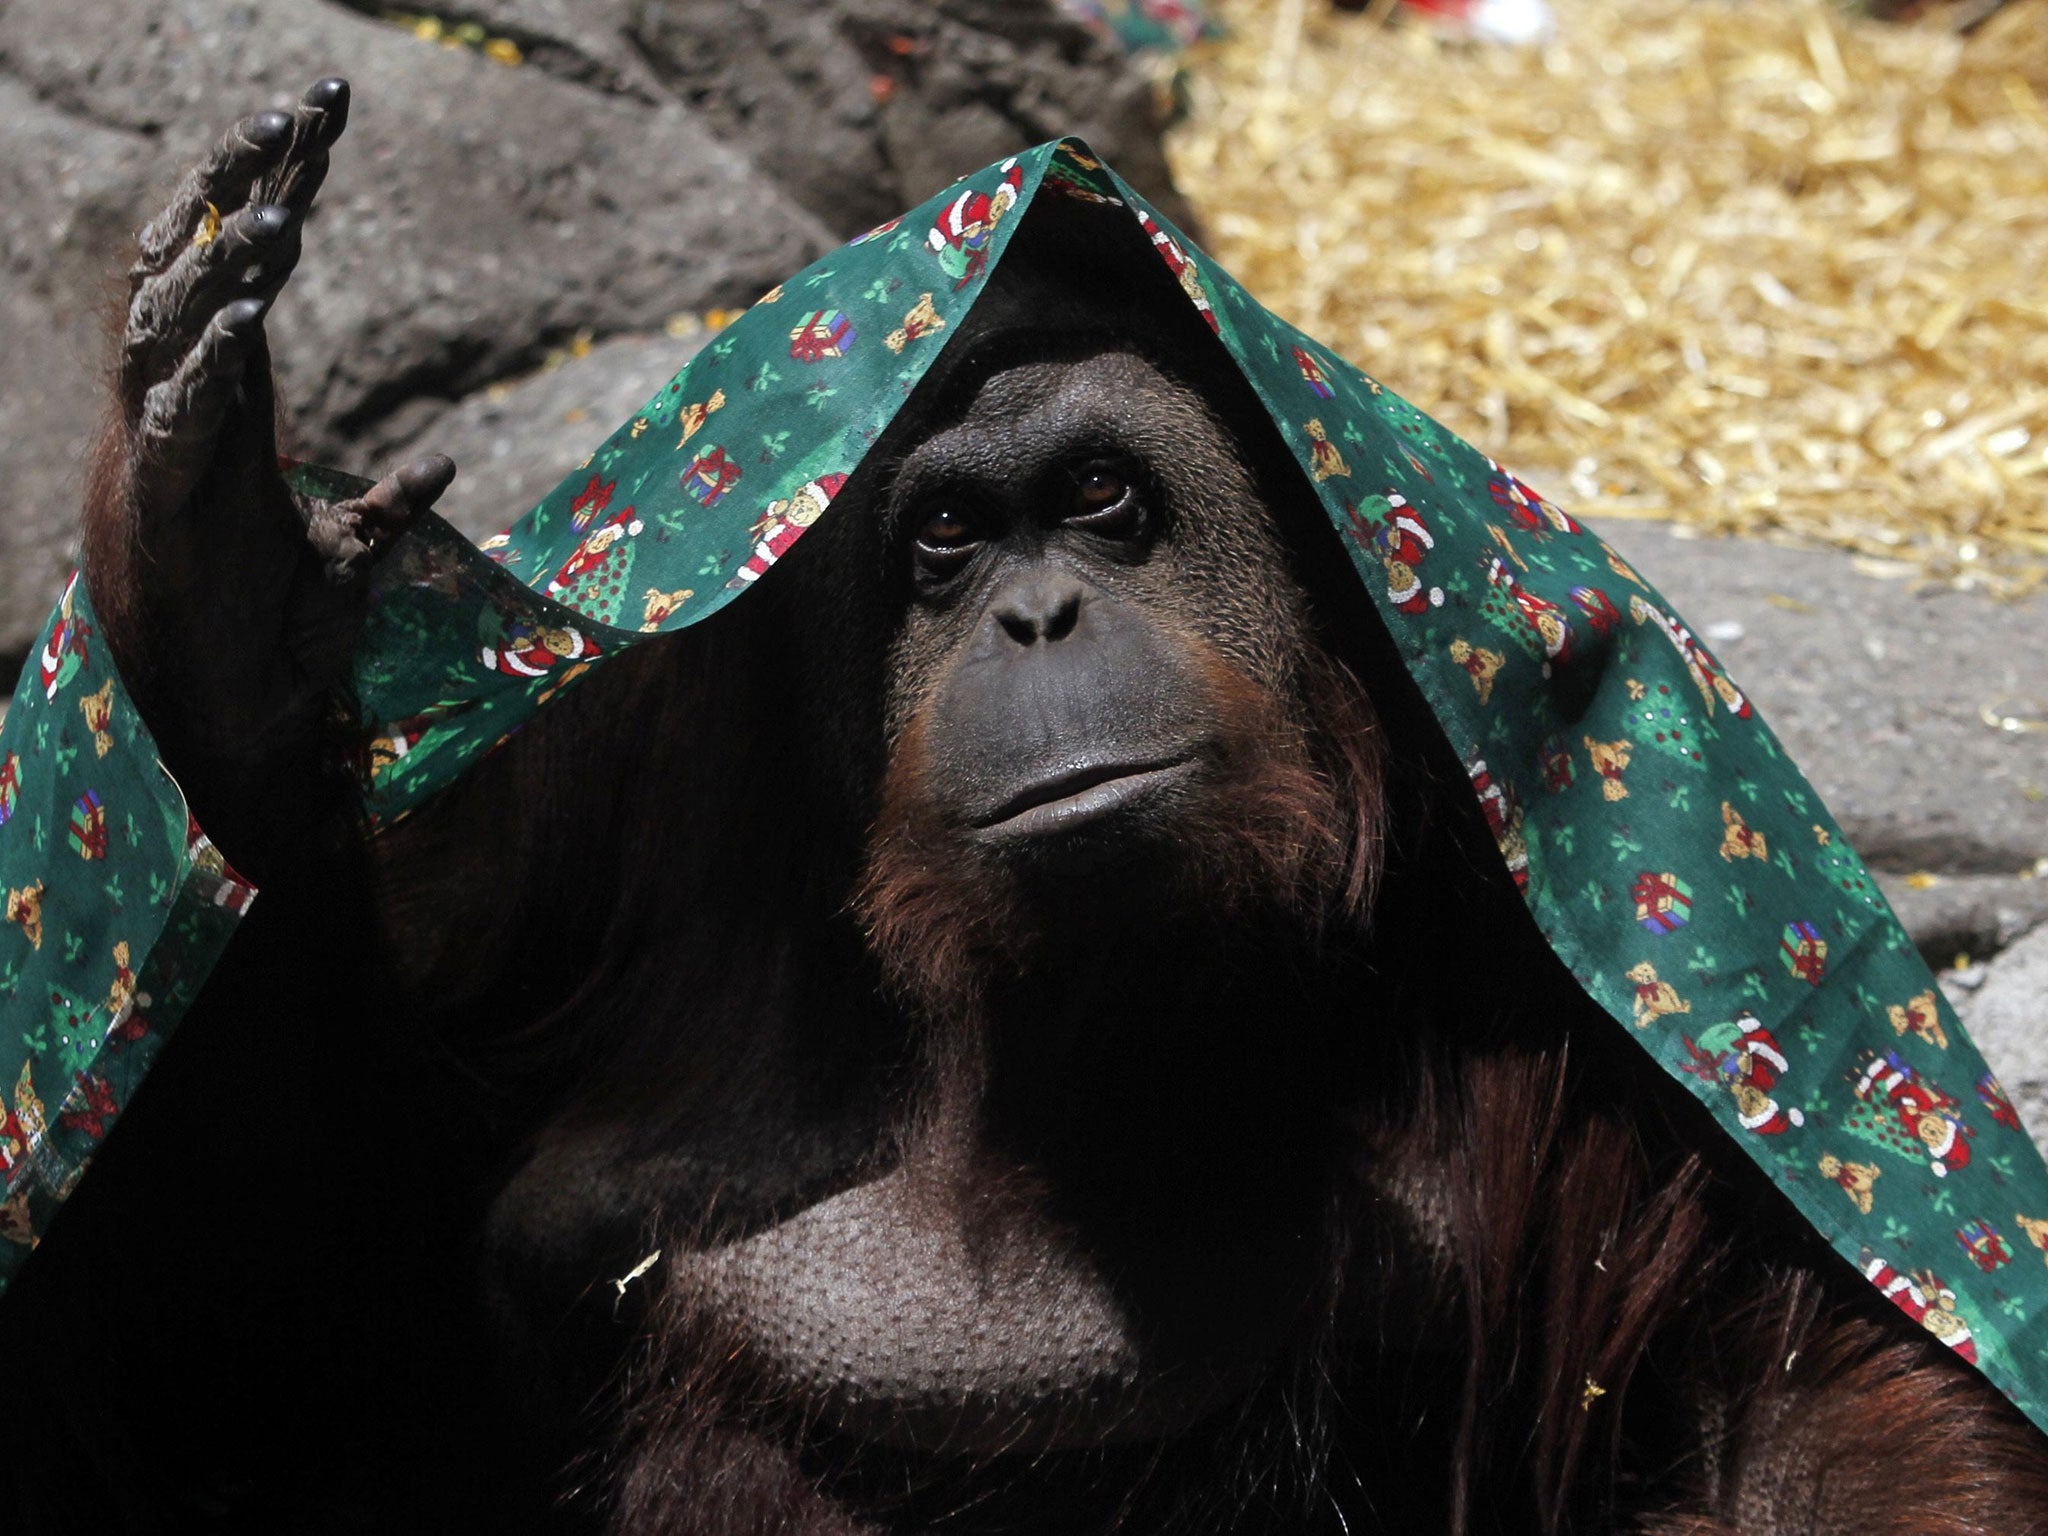 Sandra the orangutan, covered with a blanket, inside her cafe at Buenos Aires' Zoo on December 8, 2010